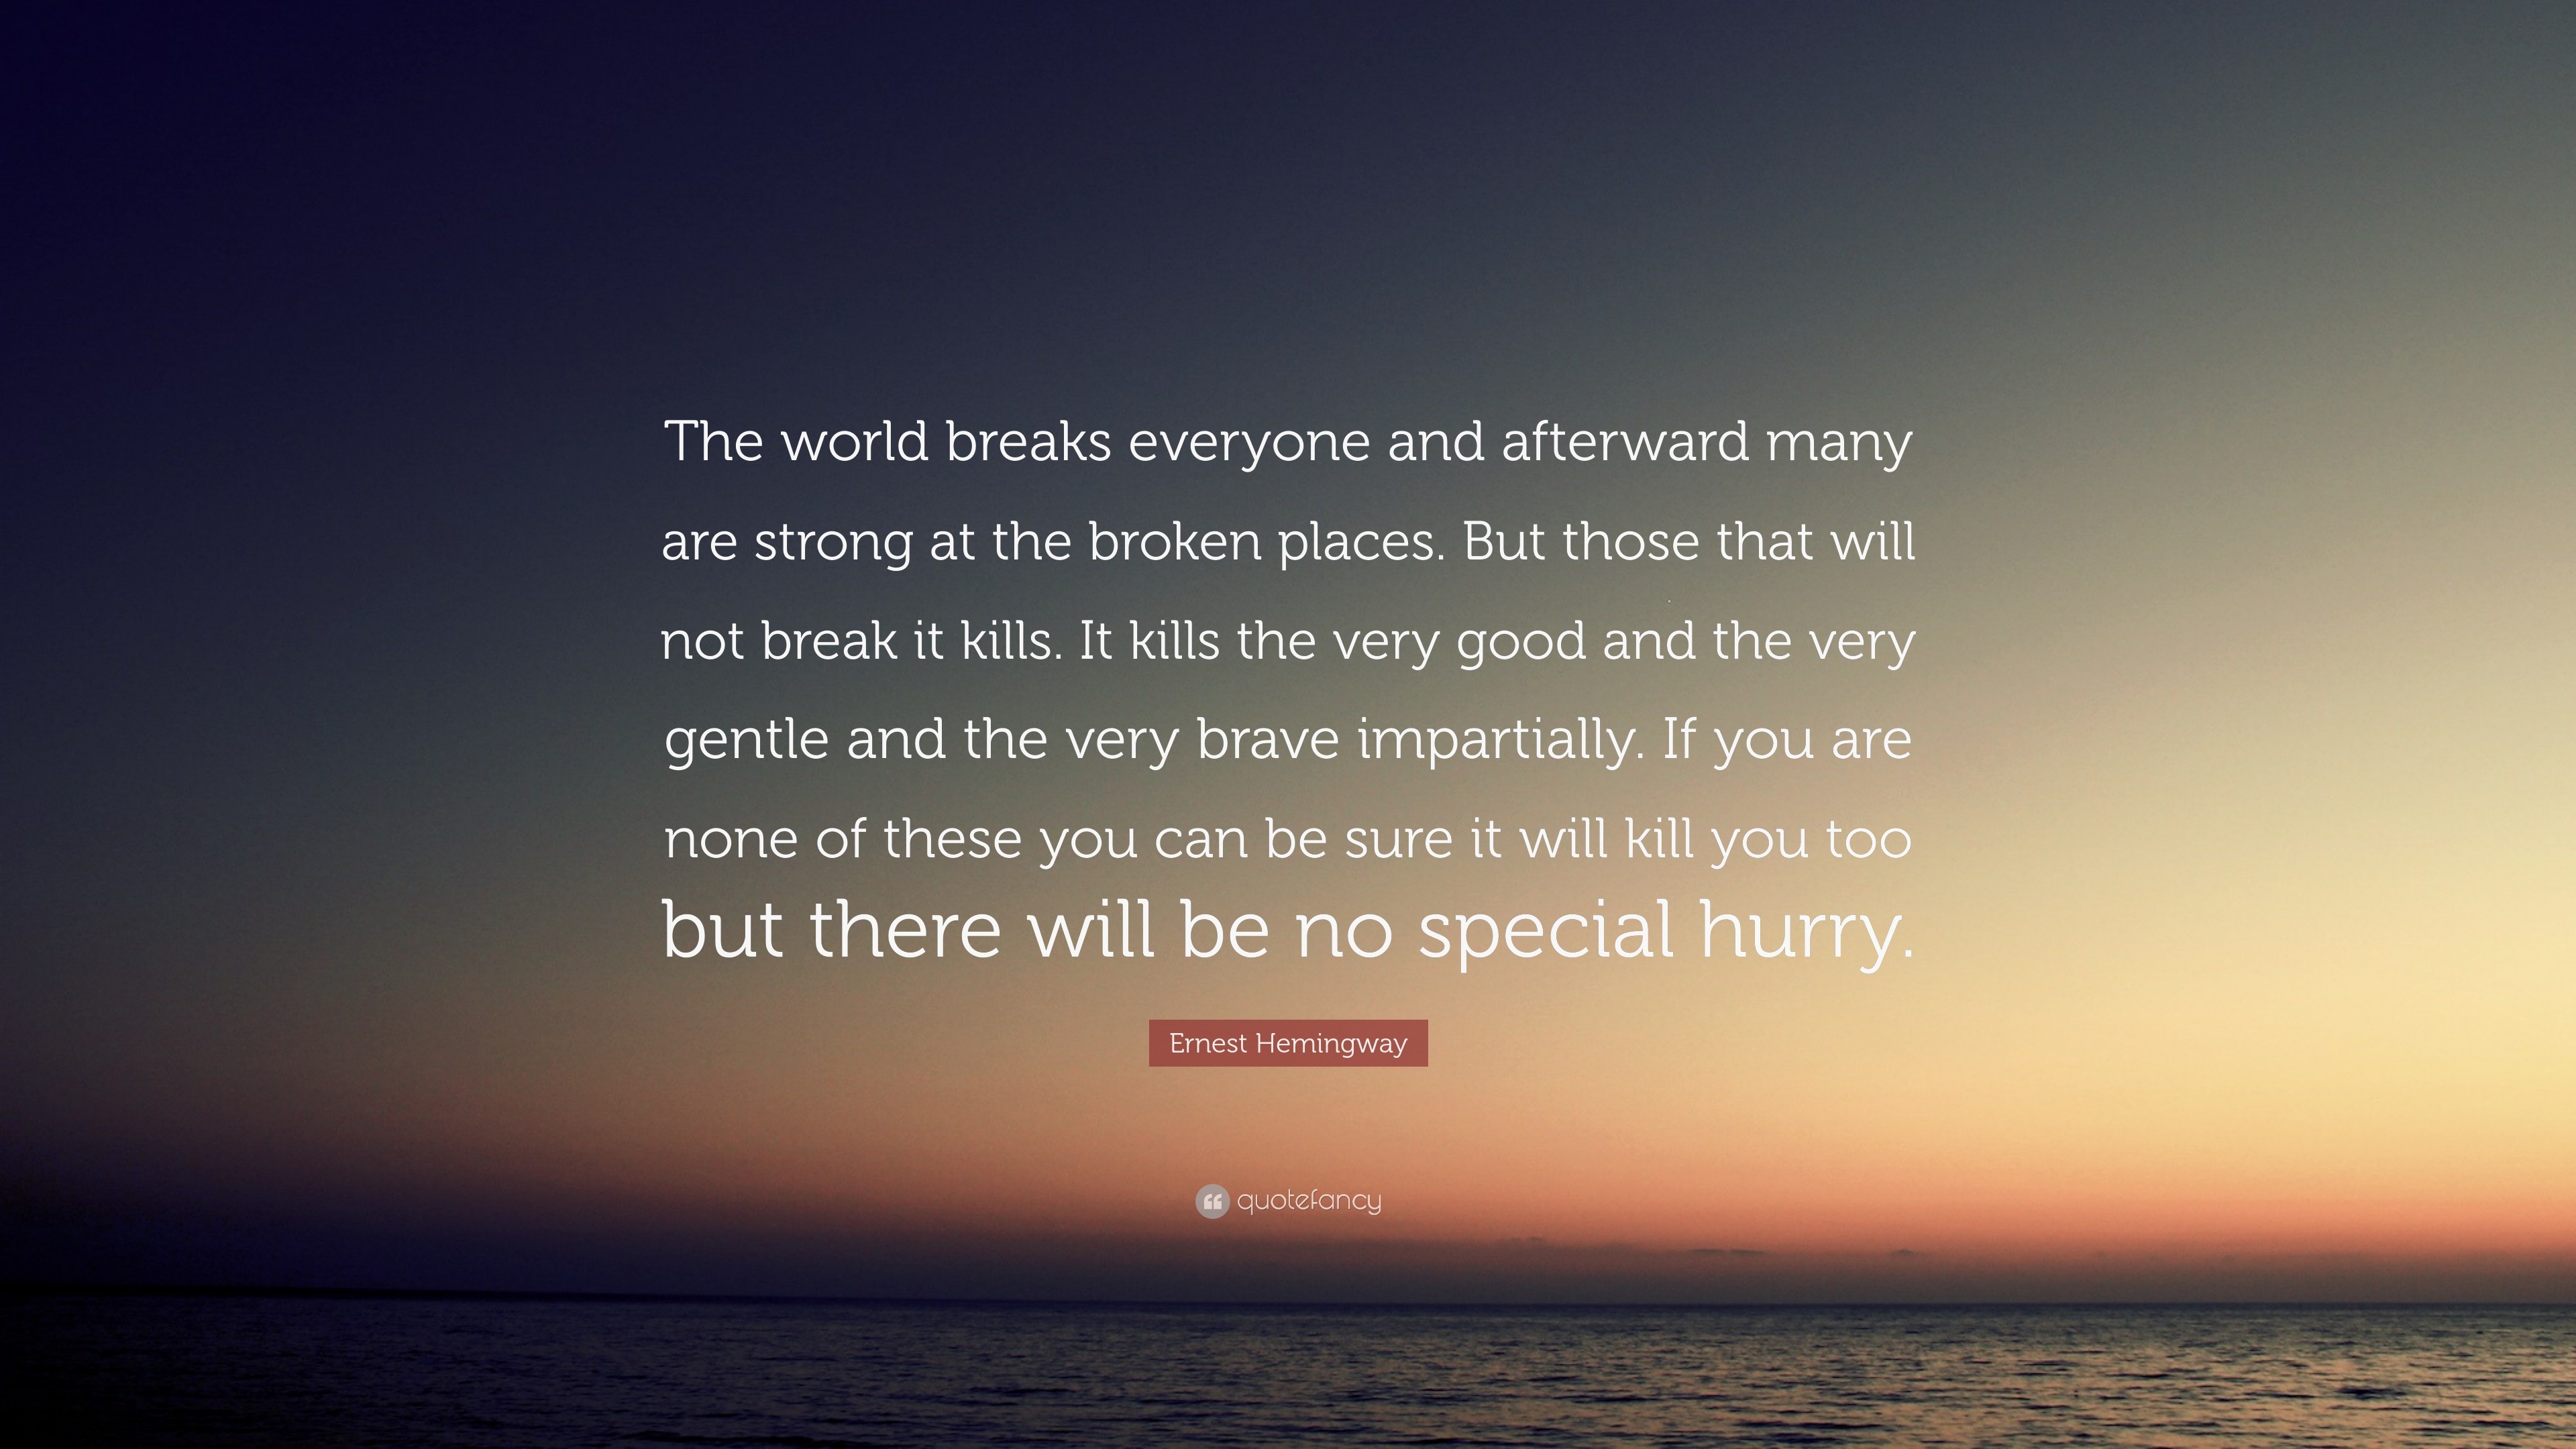 Ernest Hemingway Quote The World Breaks Everyone And Afterward Many Are Strong At The Broken Places But Those That Will Not Break It Kills It 12 Wallpapers Quotefancy